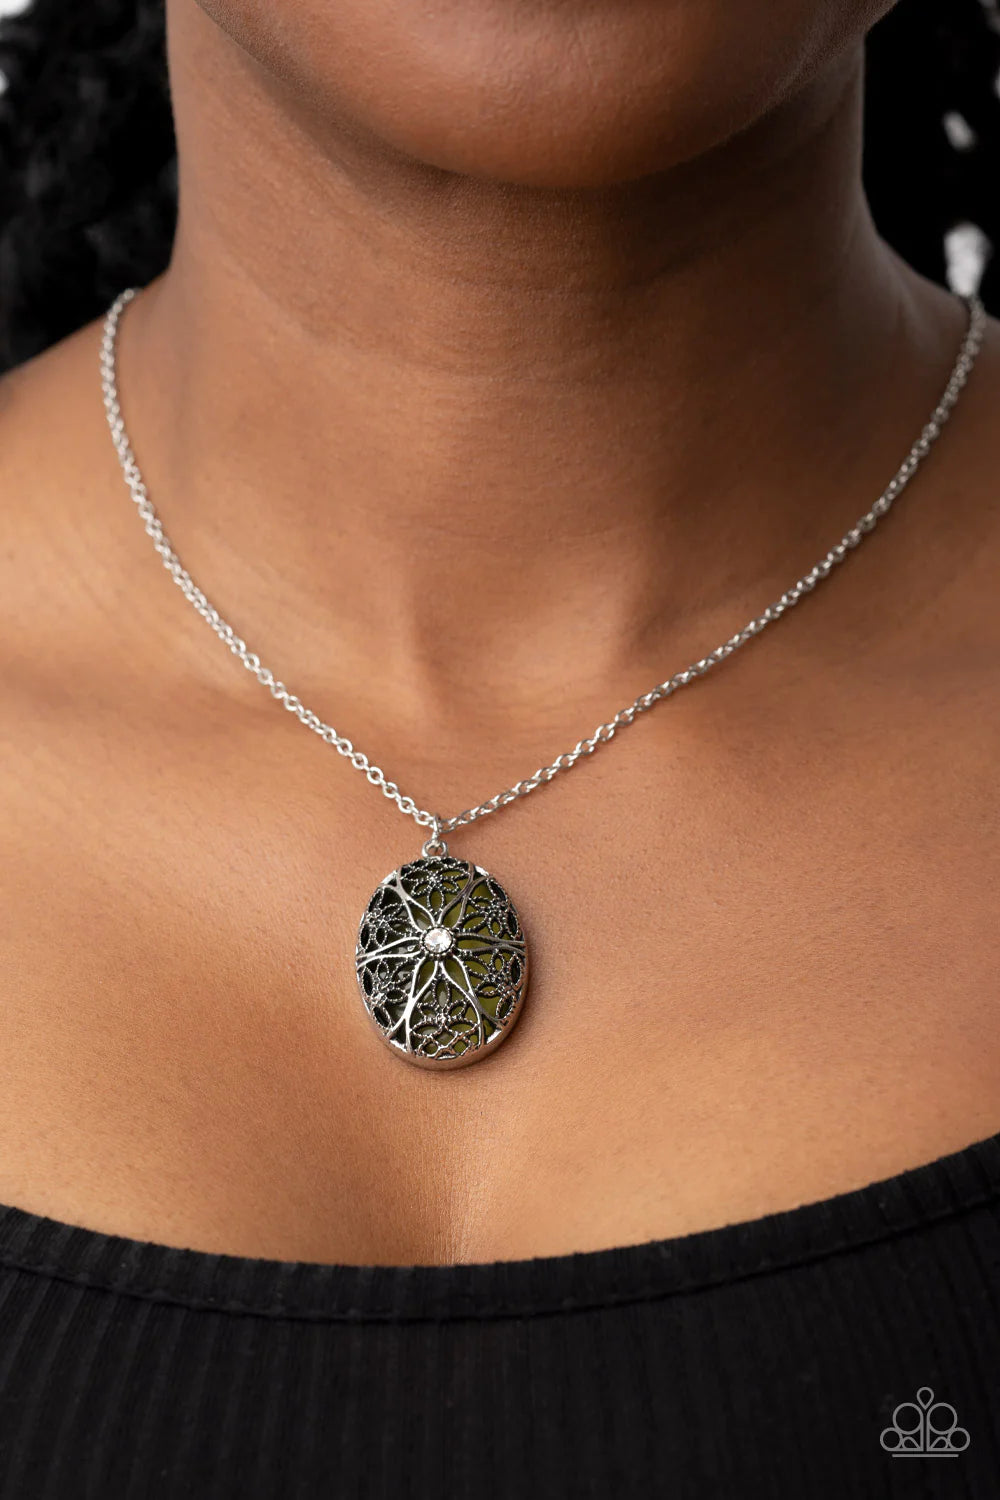 Paparazzi Accessories Venice Vacation - Green Dotted with a glitzy white rhinestone center, studded and smooth floral filigree detail blooms across the front of an oversized and Olive Branch cat's eye stone, resulting in a whimsical pendant at the bottom